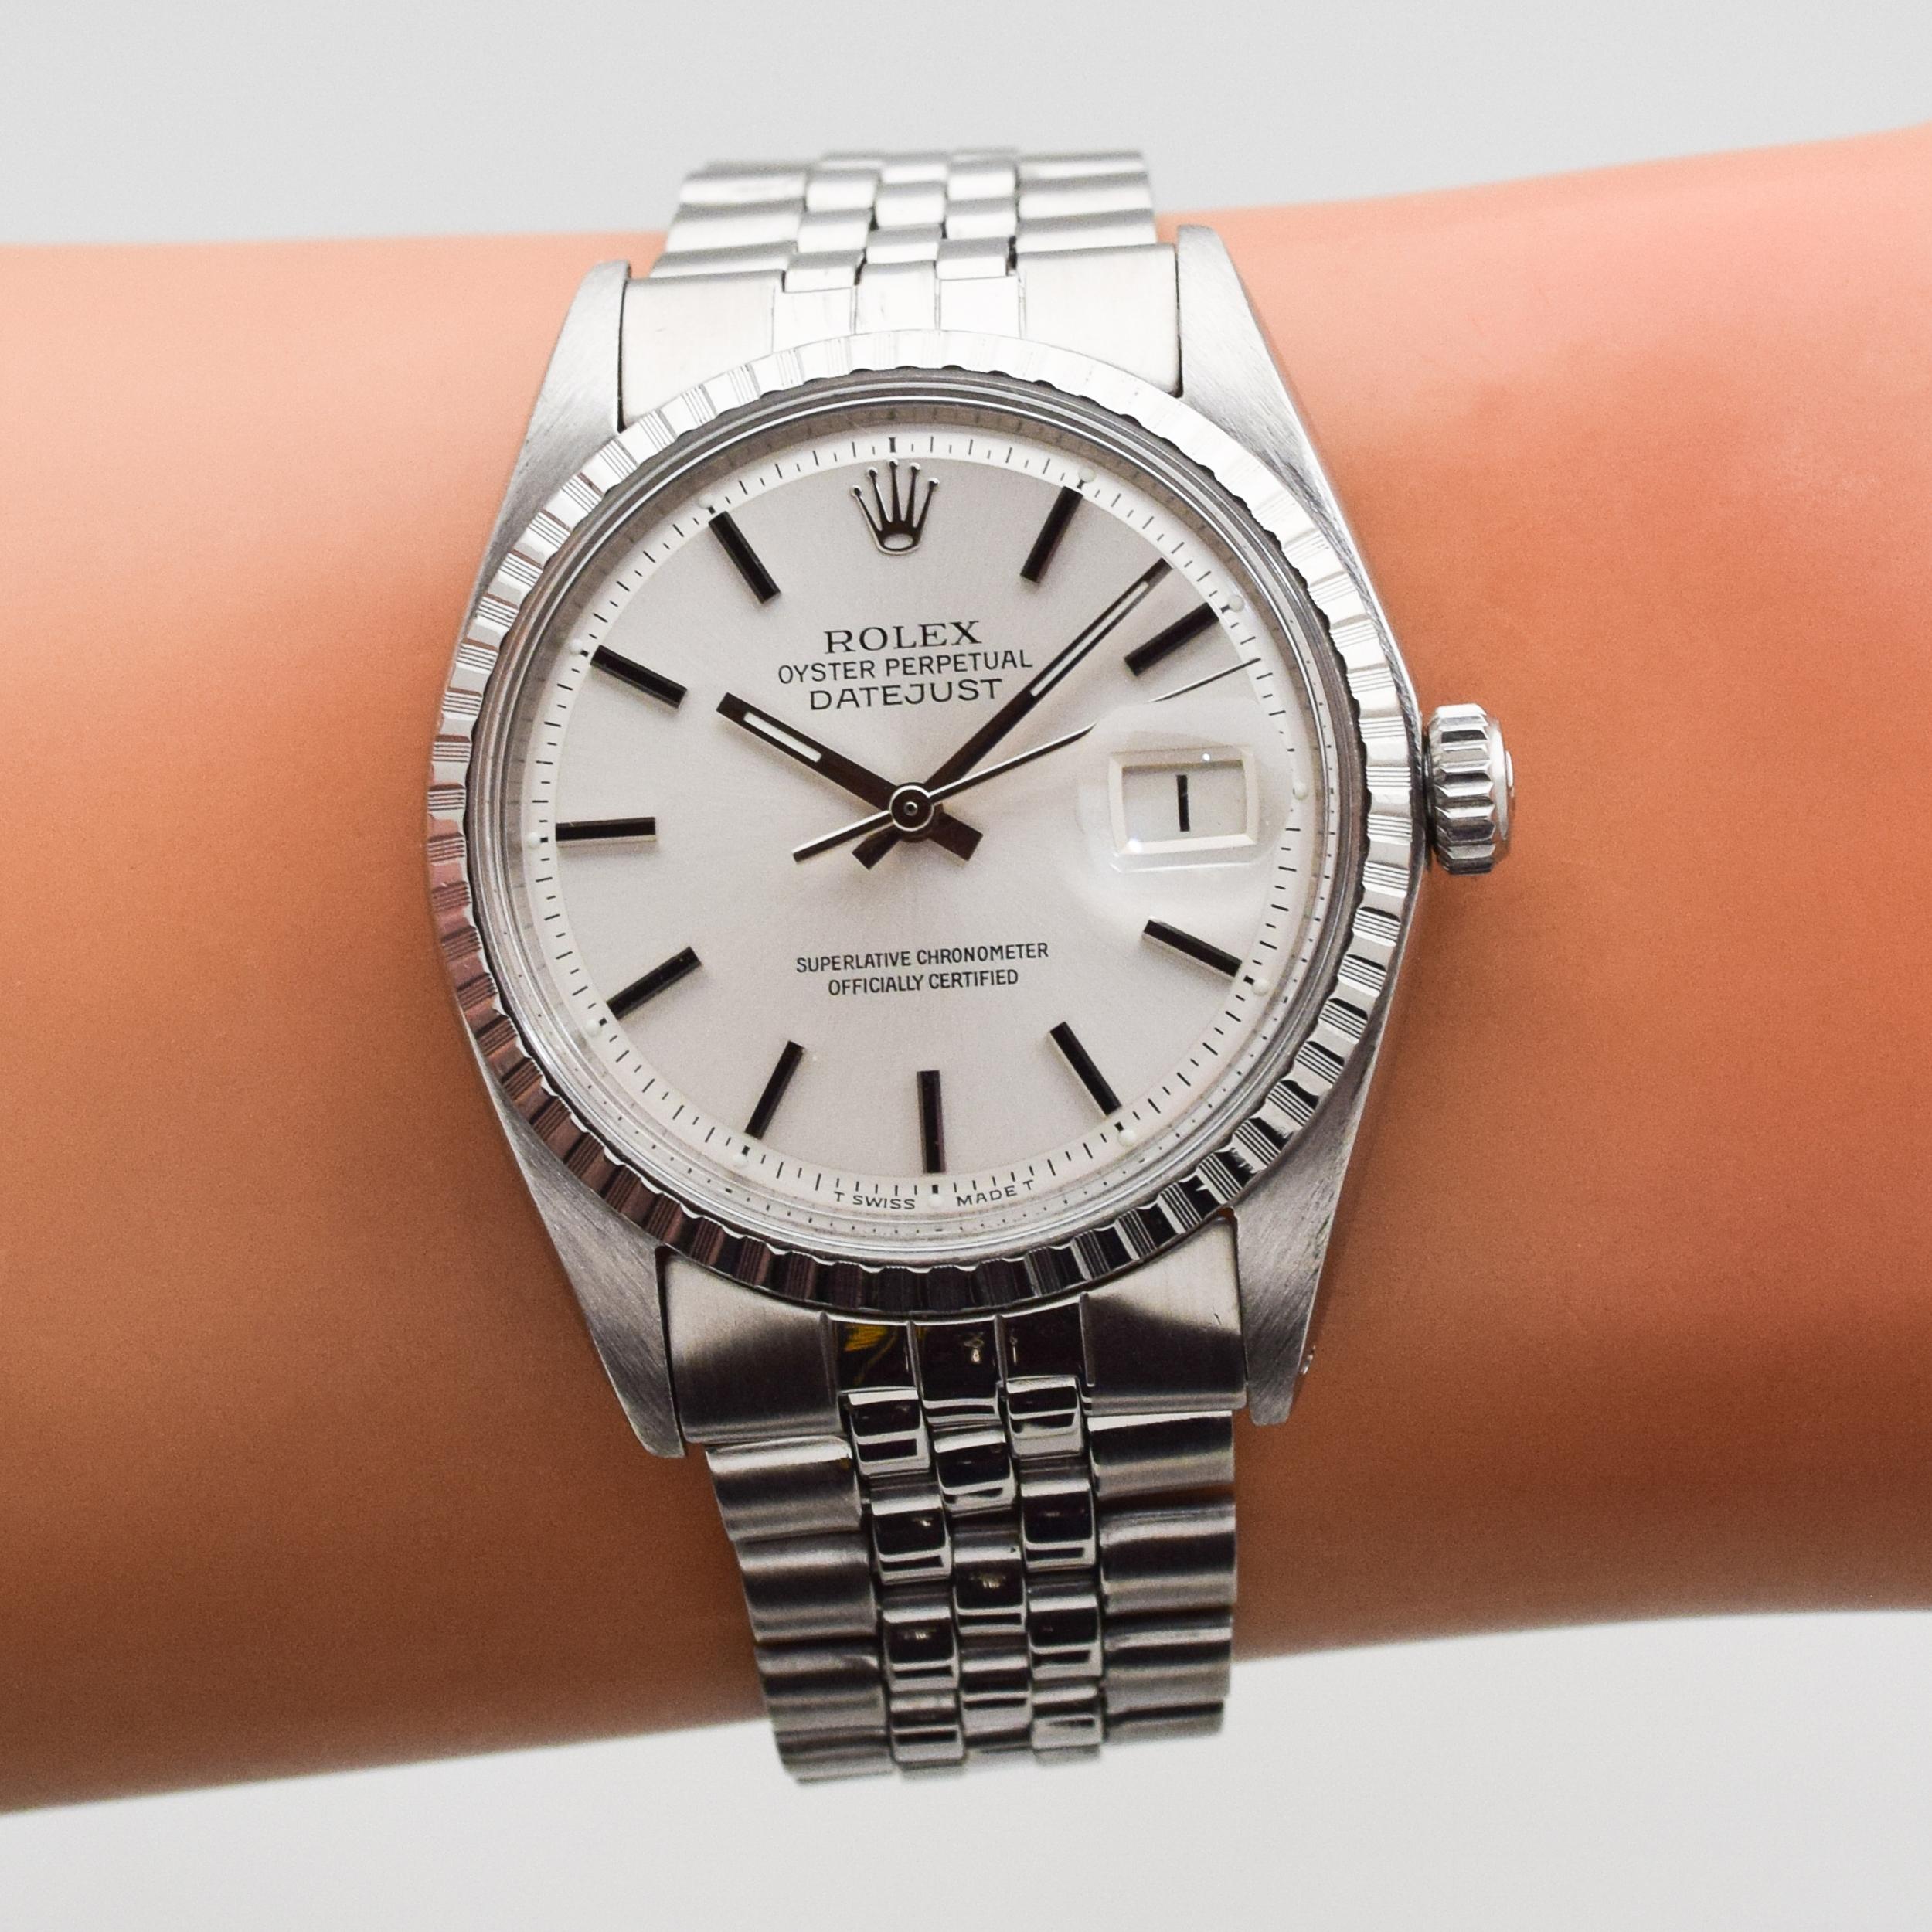 Vintage Rolex Datejust Reference 1603 Stainless Steel Watch, 1968 4